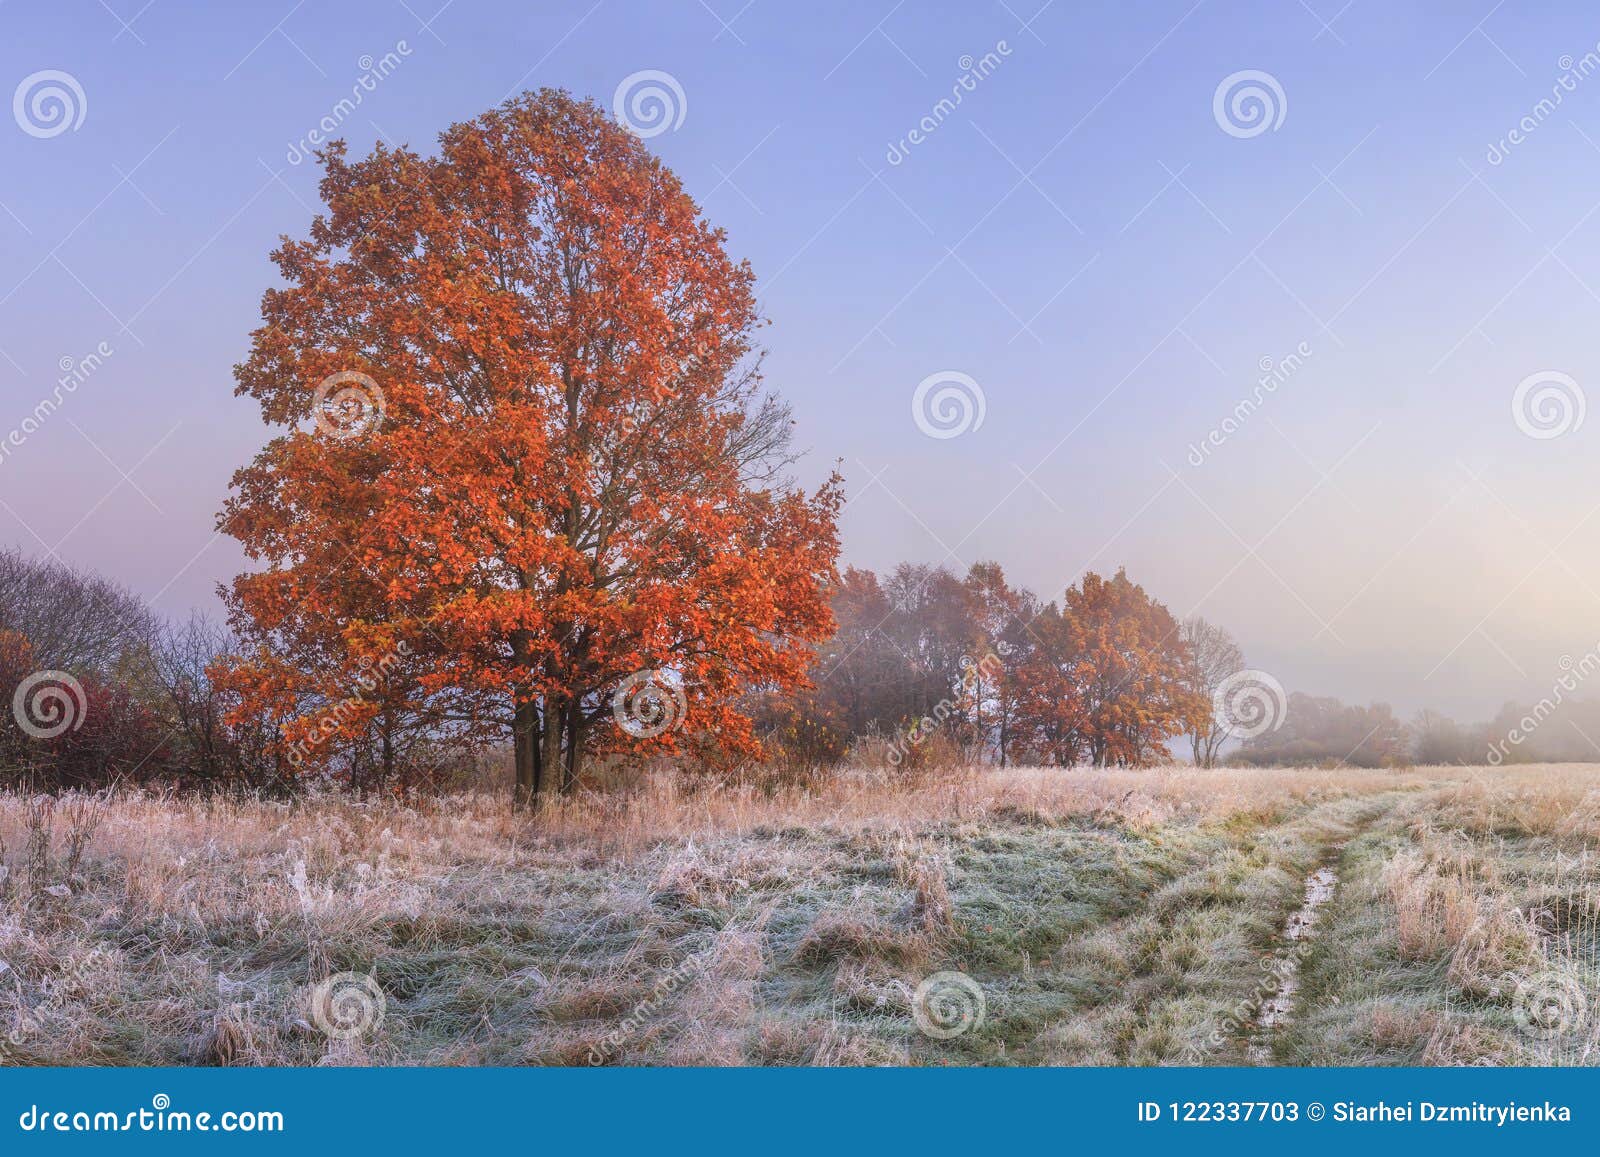 autumn landscape. amazing fall in november. morning autumnal nature. cold meadow with hoarfrost on grass and red foliage on trees